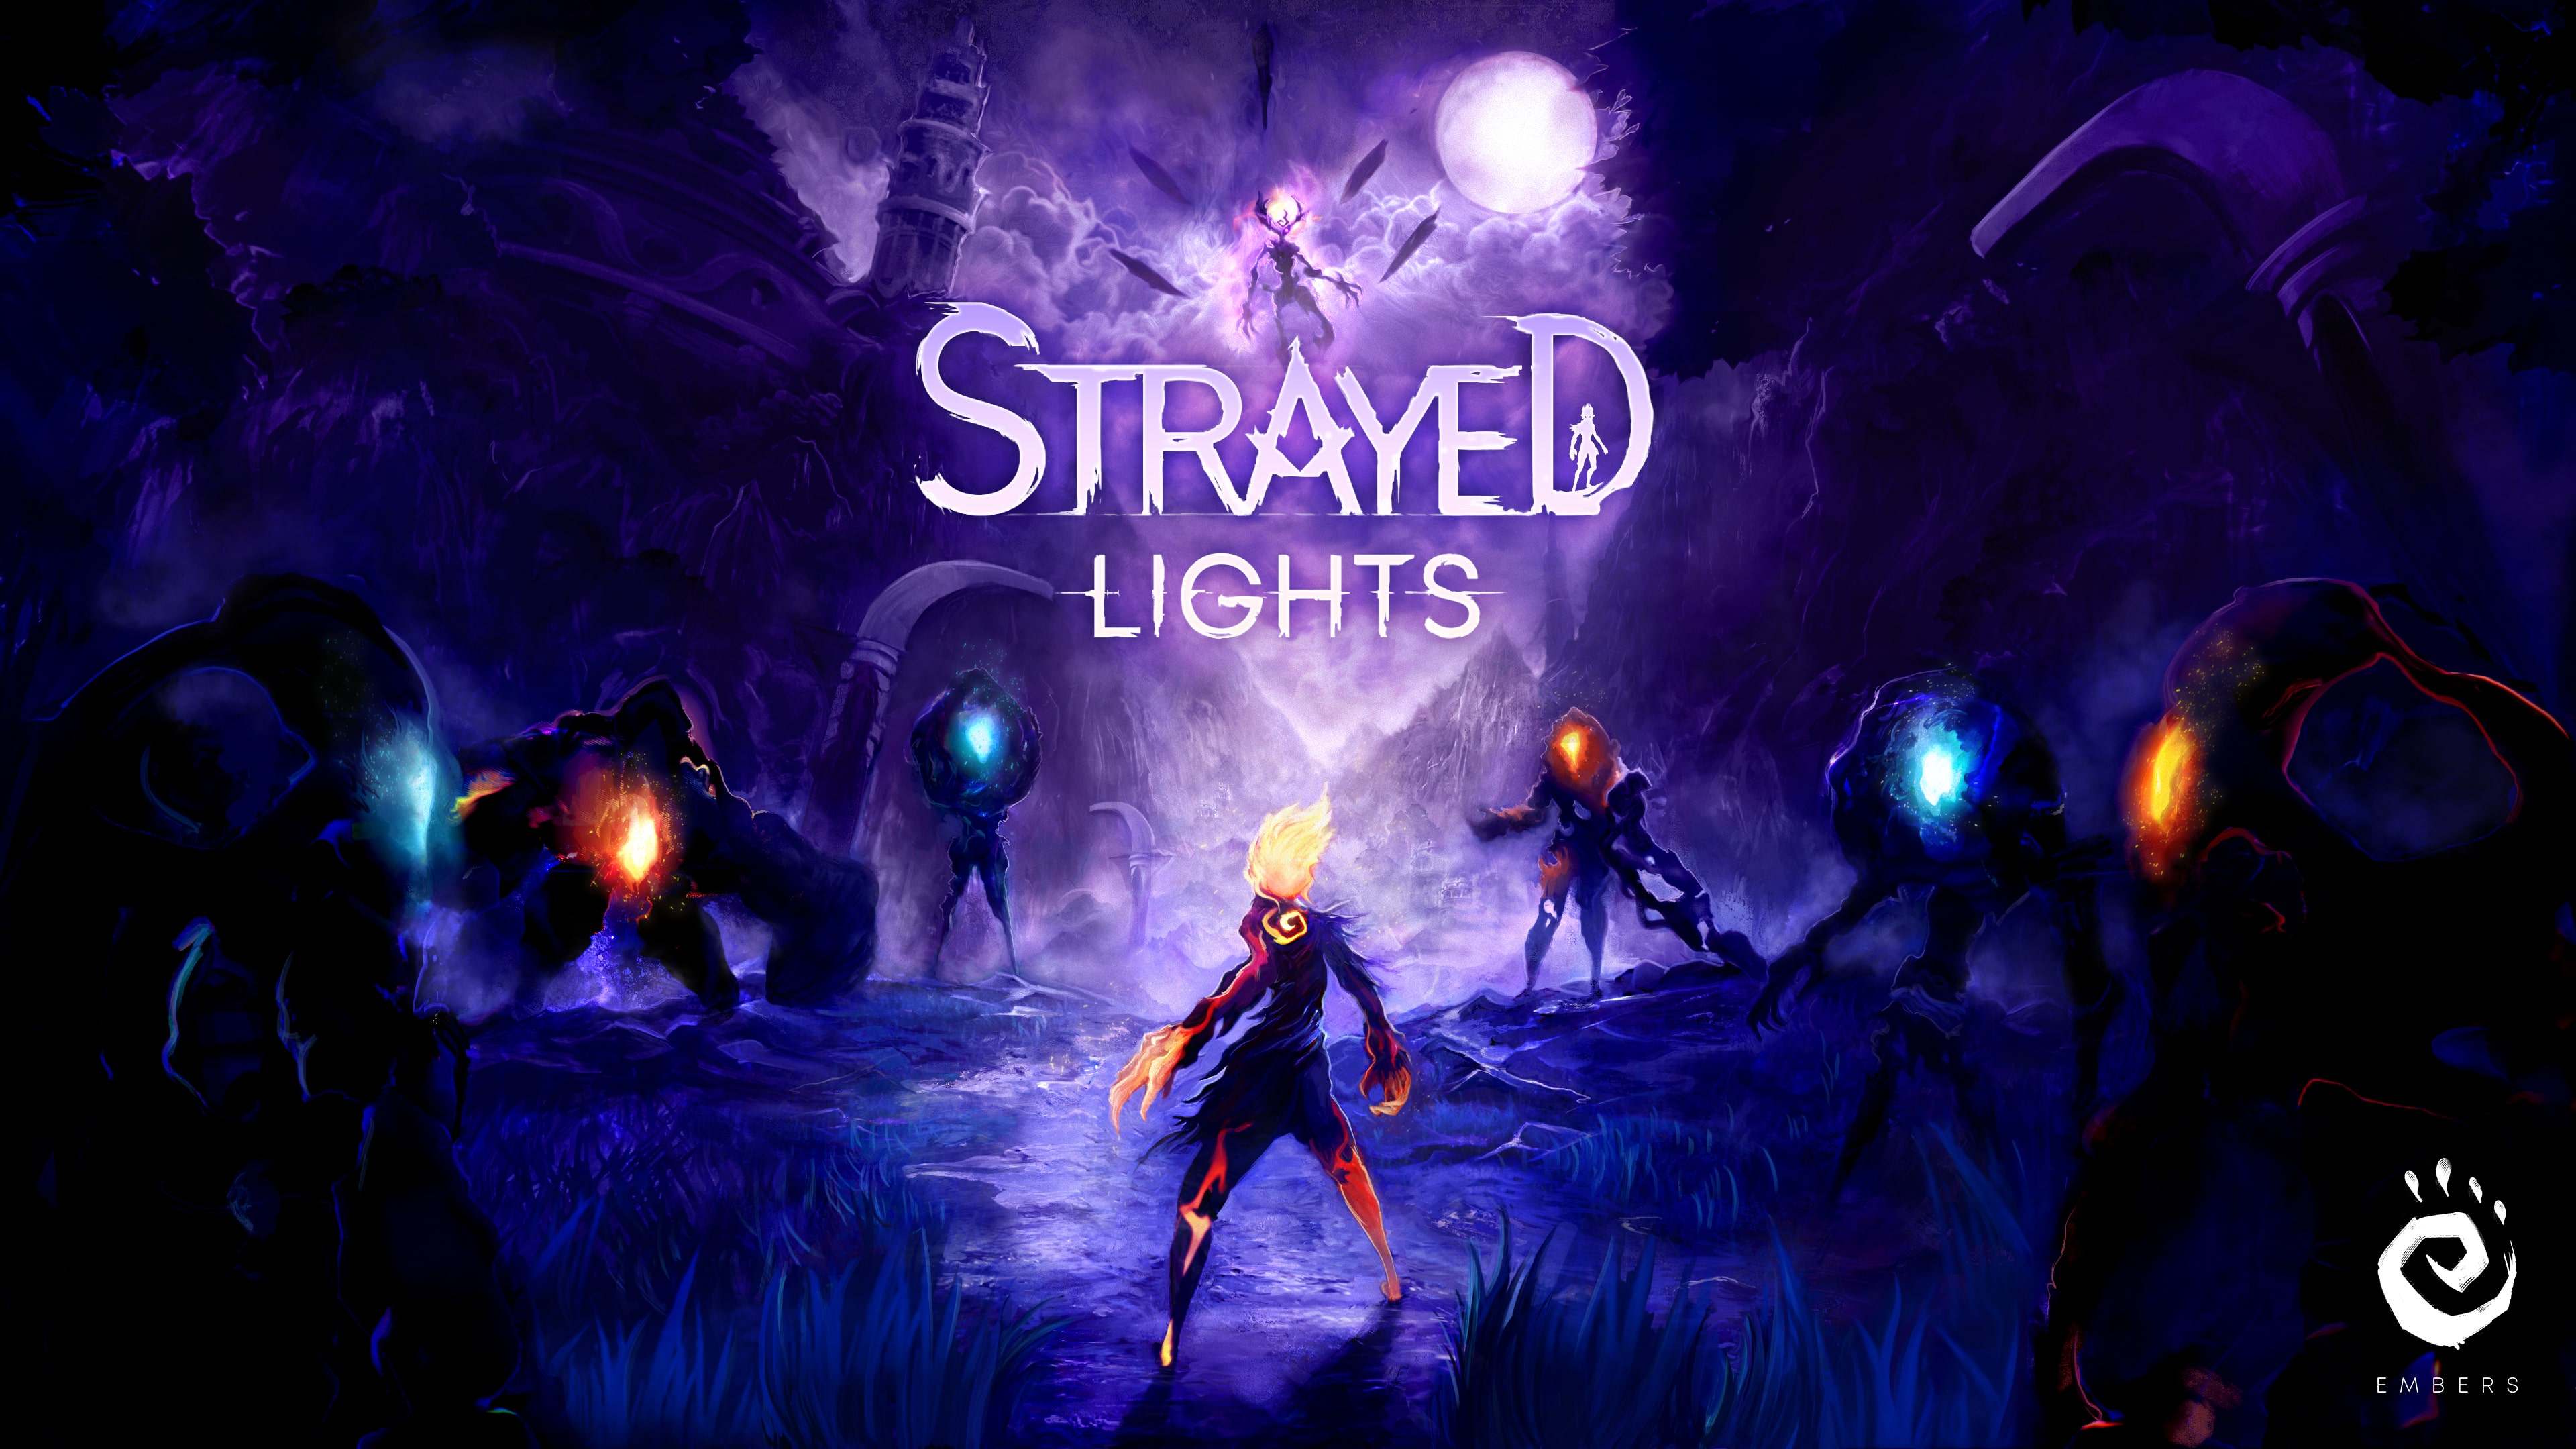 Strayed Lights (Simplified Chinese, English, Korean, Japanese, Traditional Chinese)